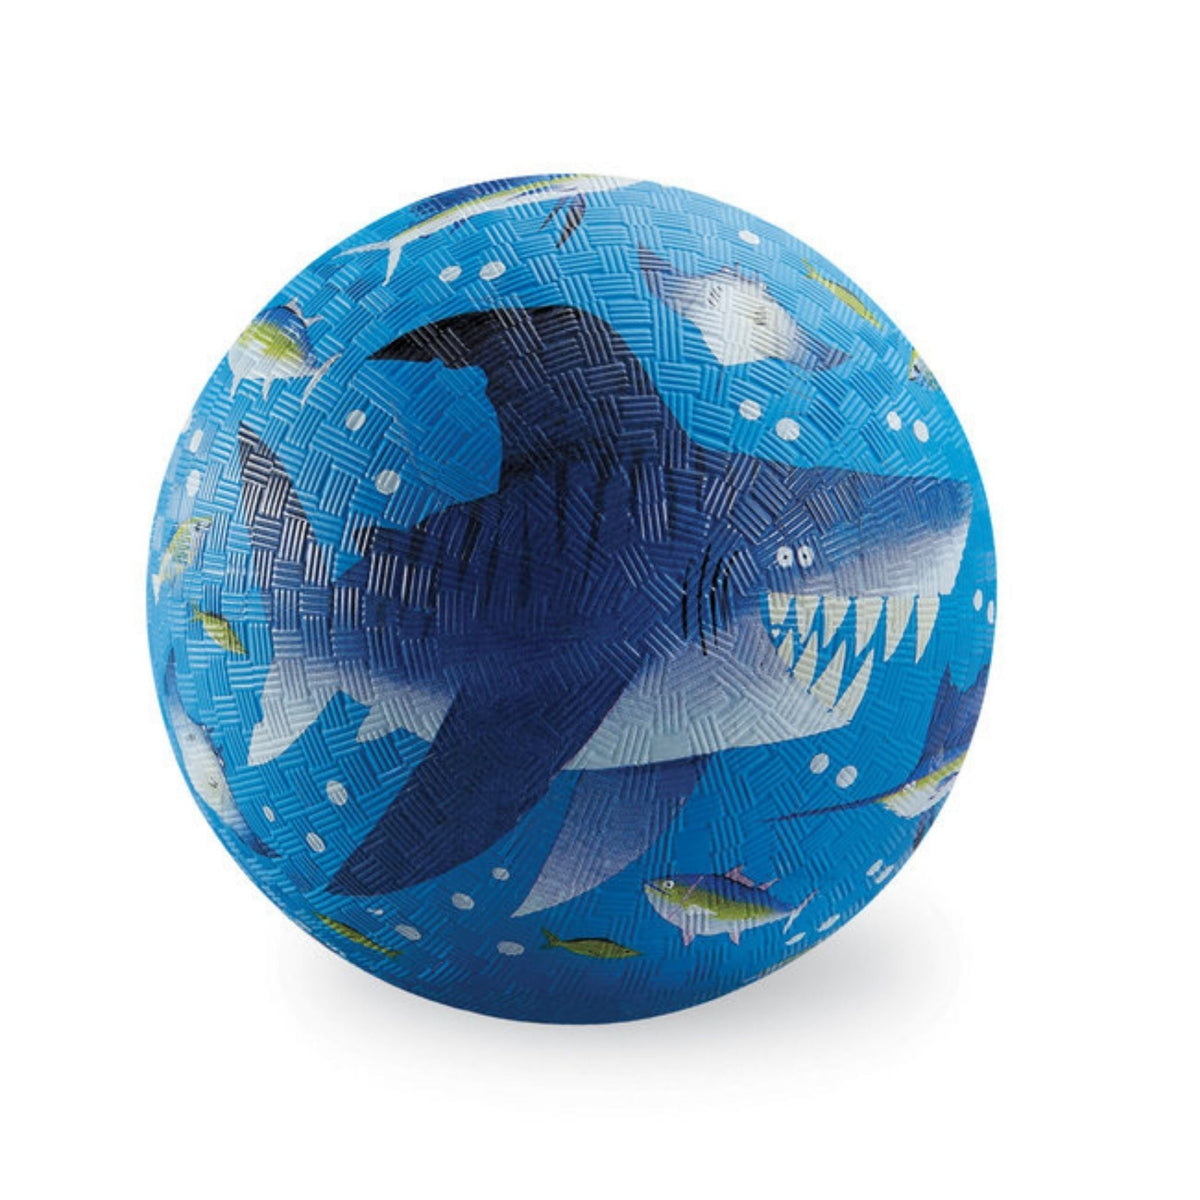 5&quot; playball with shark reef pattern.